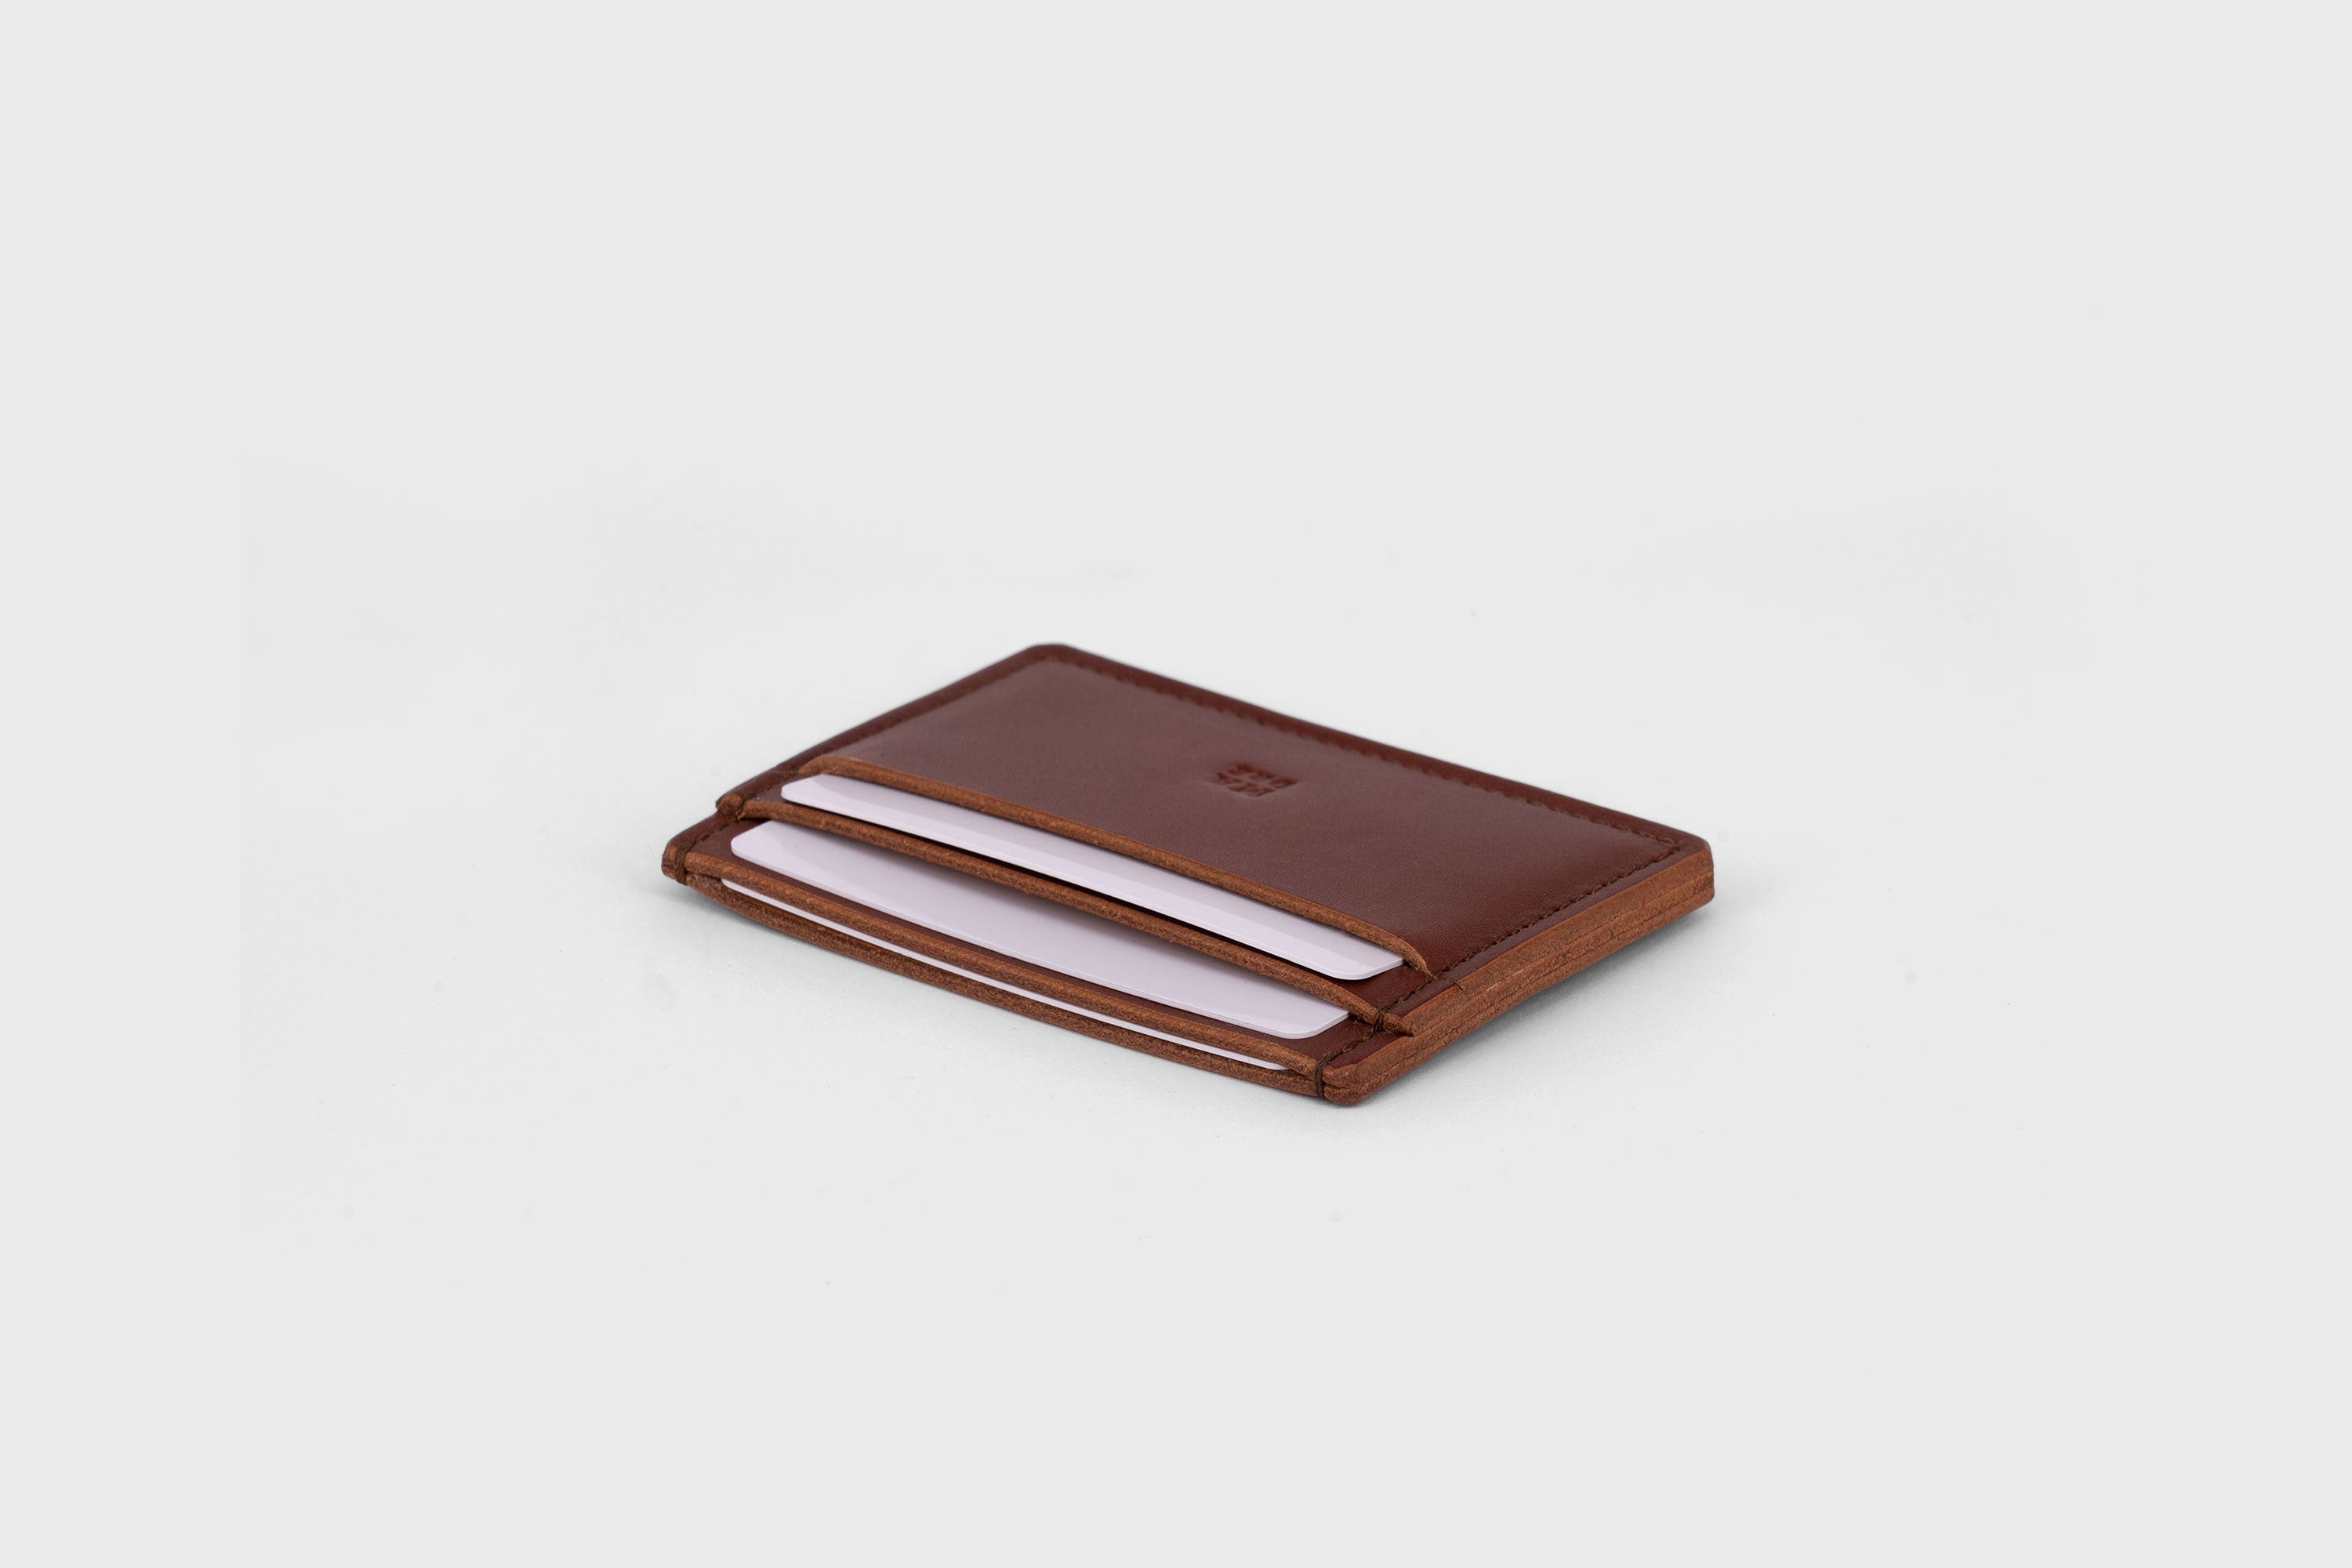 Credit Card Wallet in Dark Brown Leather Vachetta Novillo Vegetable Tanned Leather Handmade and Design by Atelier Madre Manuel Dreesmann Barcelona Spain